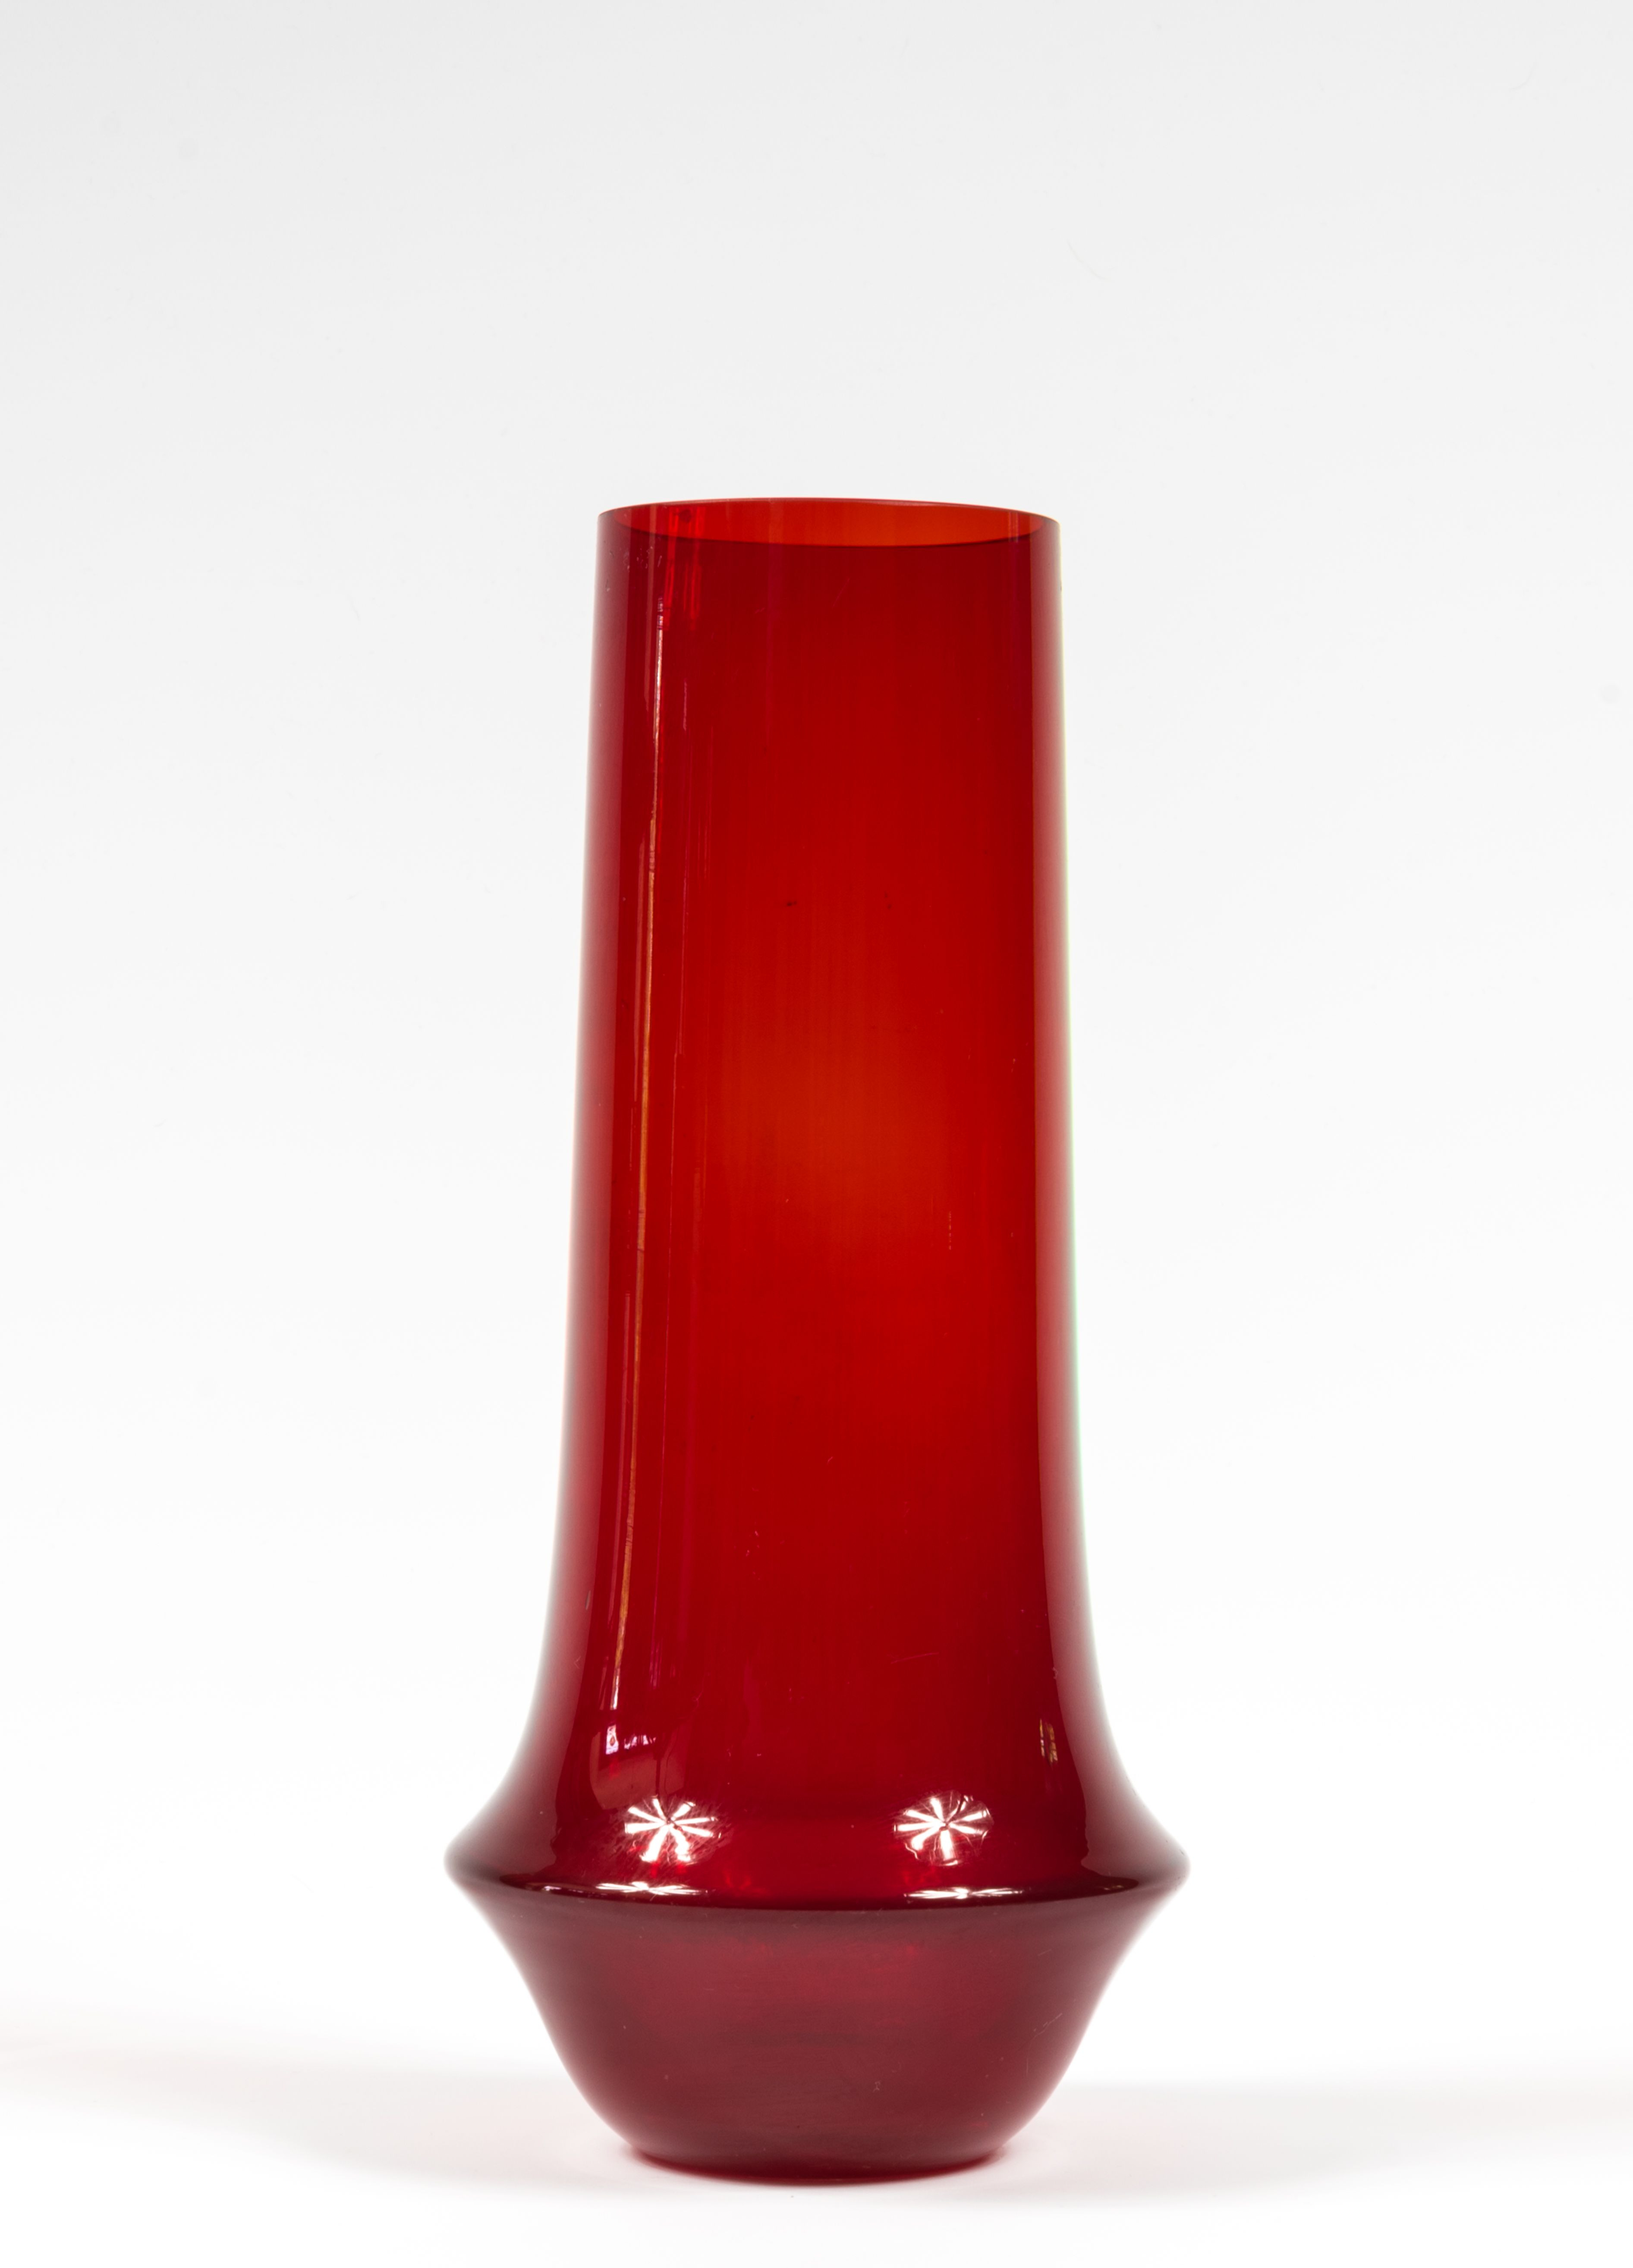 18 Great Extra Large Floor Glass Vases 2024 free download extra large floor glass vases of riihimac2a4en lasi oy riihimaki red glass vase by tamara aladin pertaining to large scandinavian red glass vase designed by tamara aladin c1963 for riihimaki